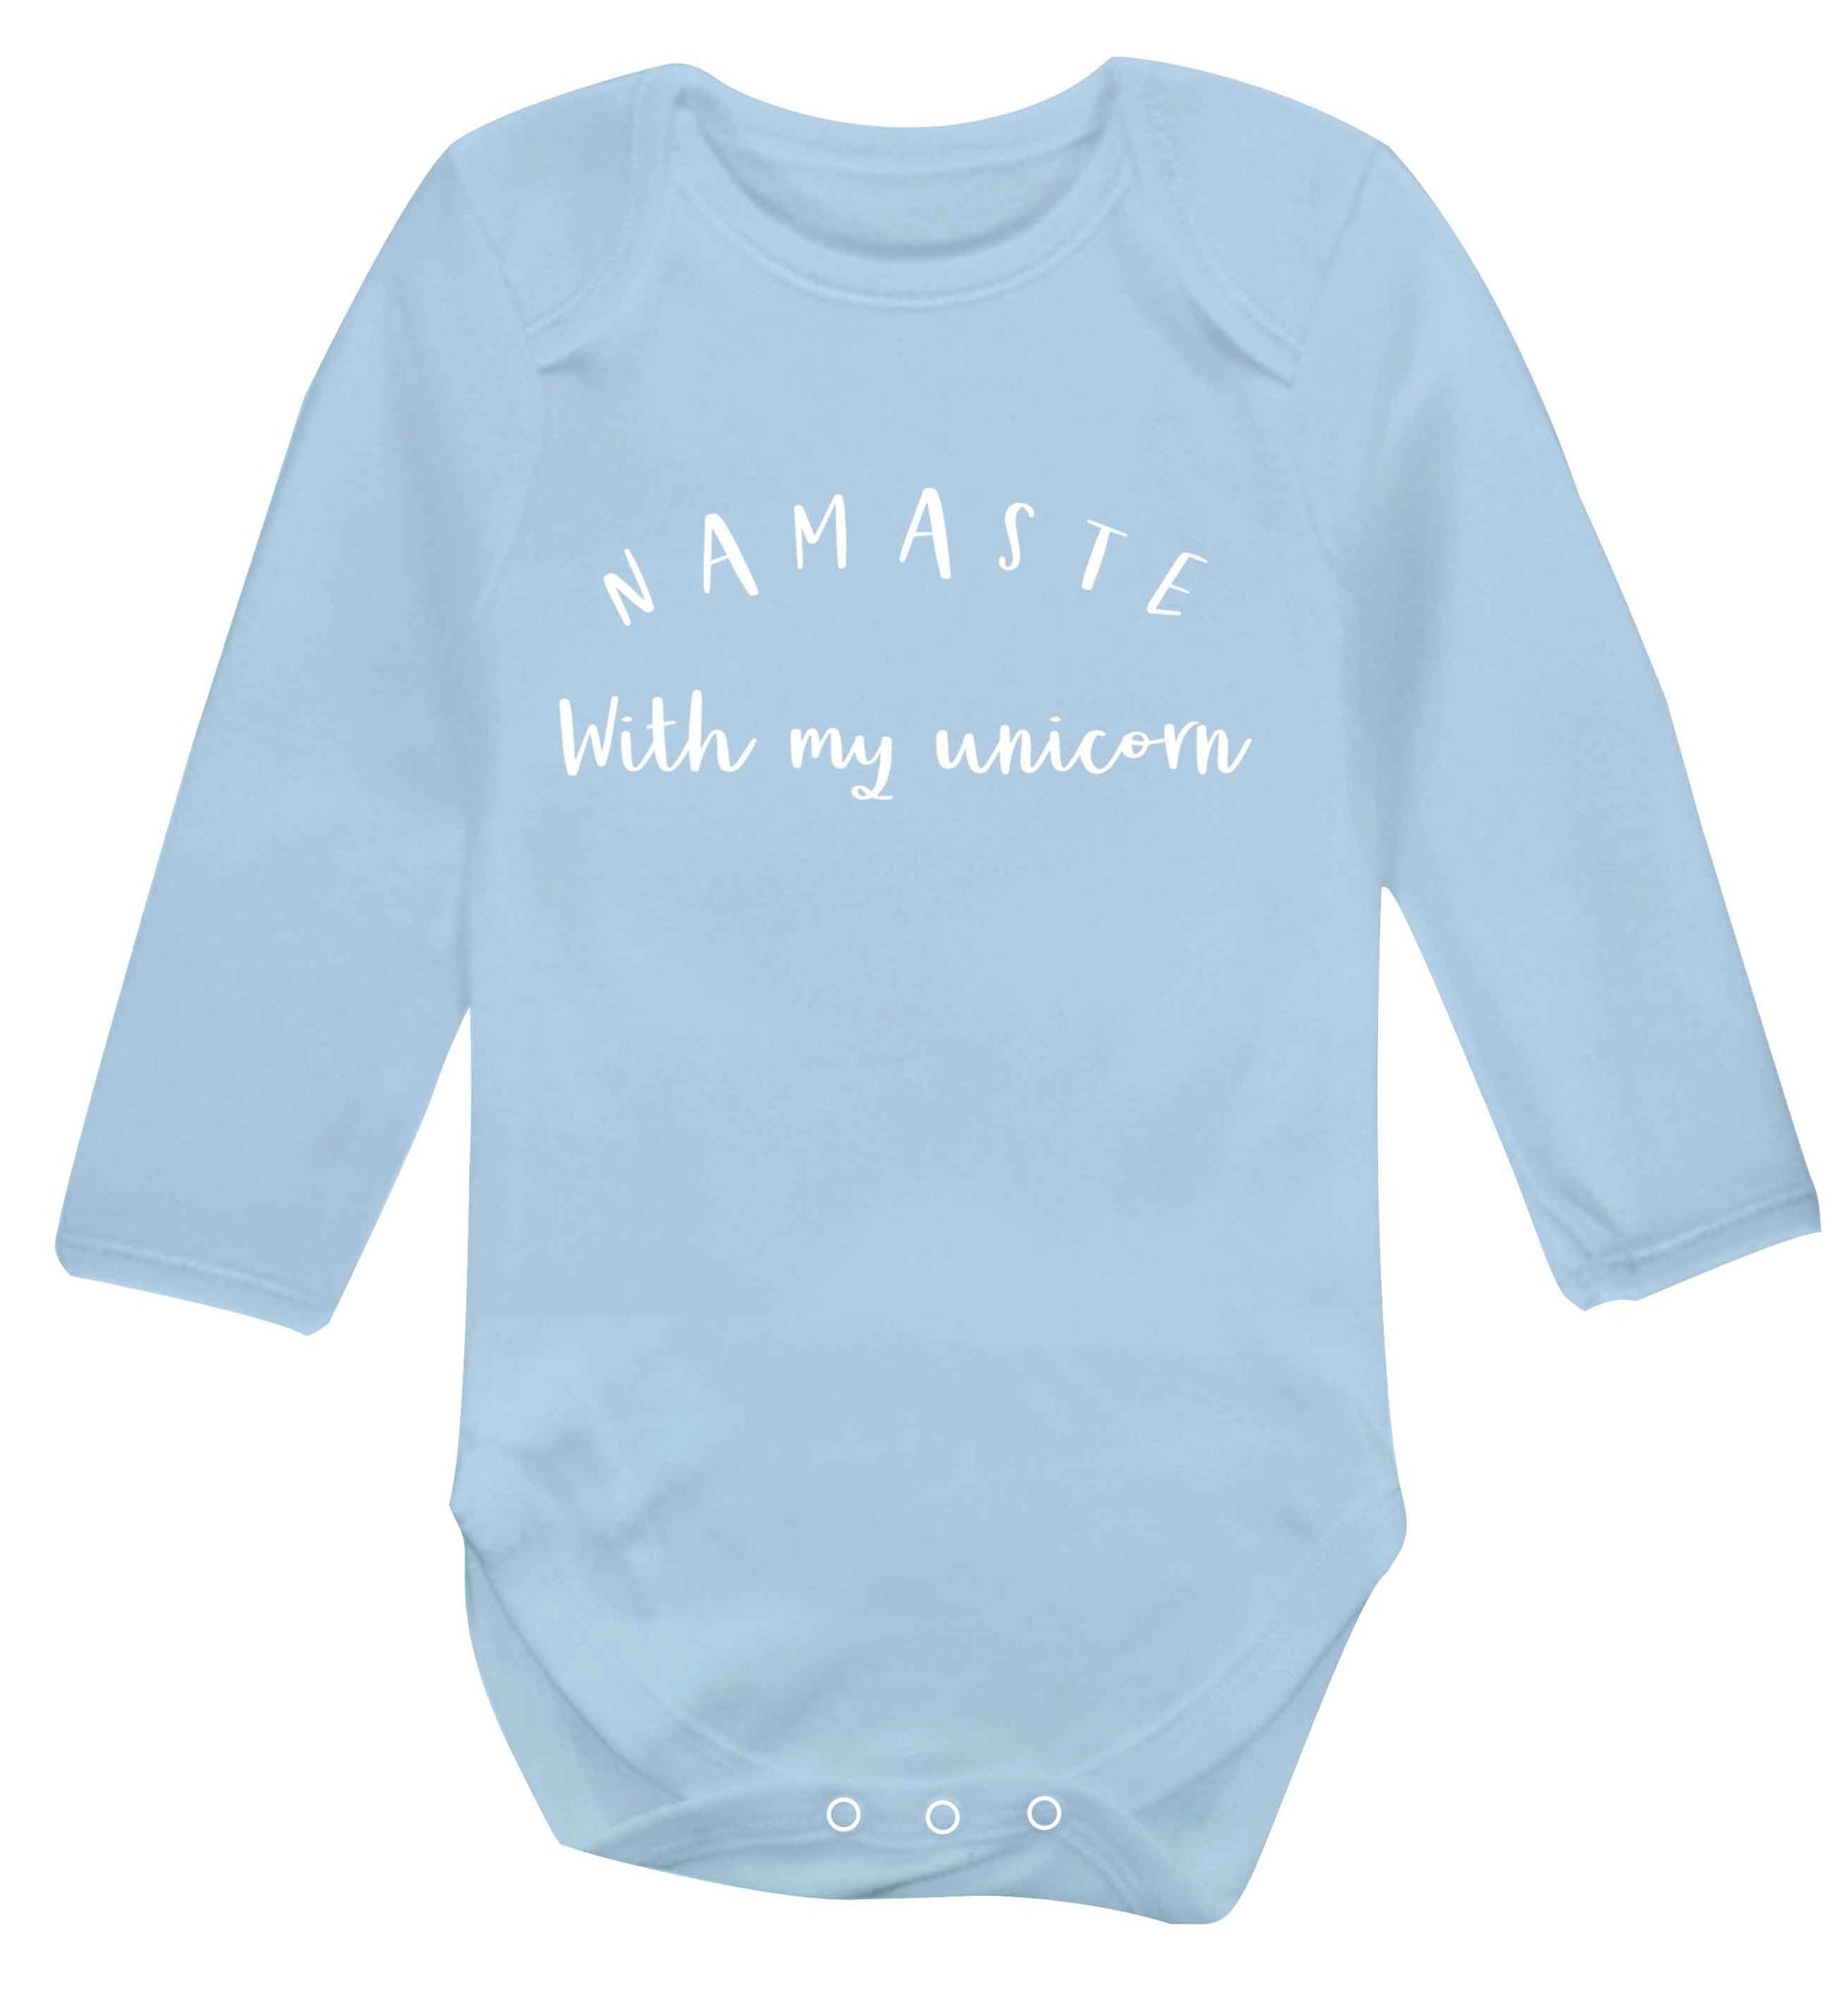 Namaste with my unicorn Baby Vest long sleeved pale blue 6-12 months